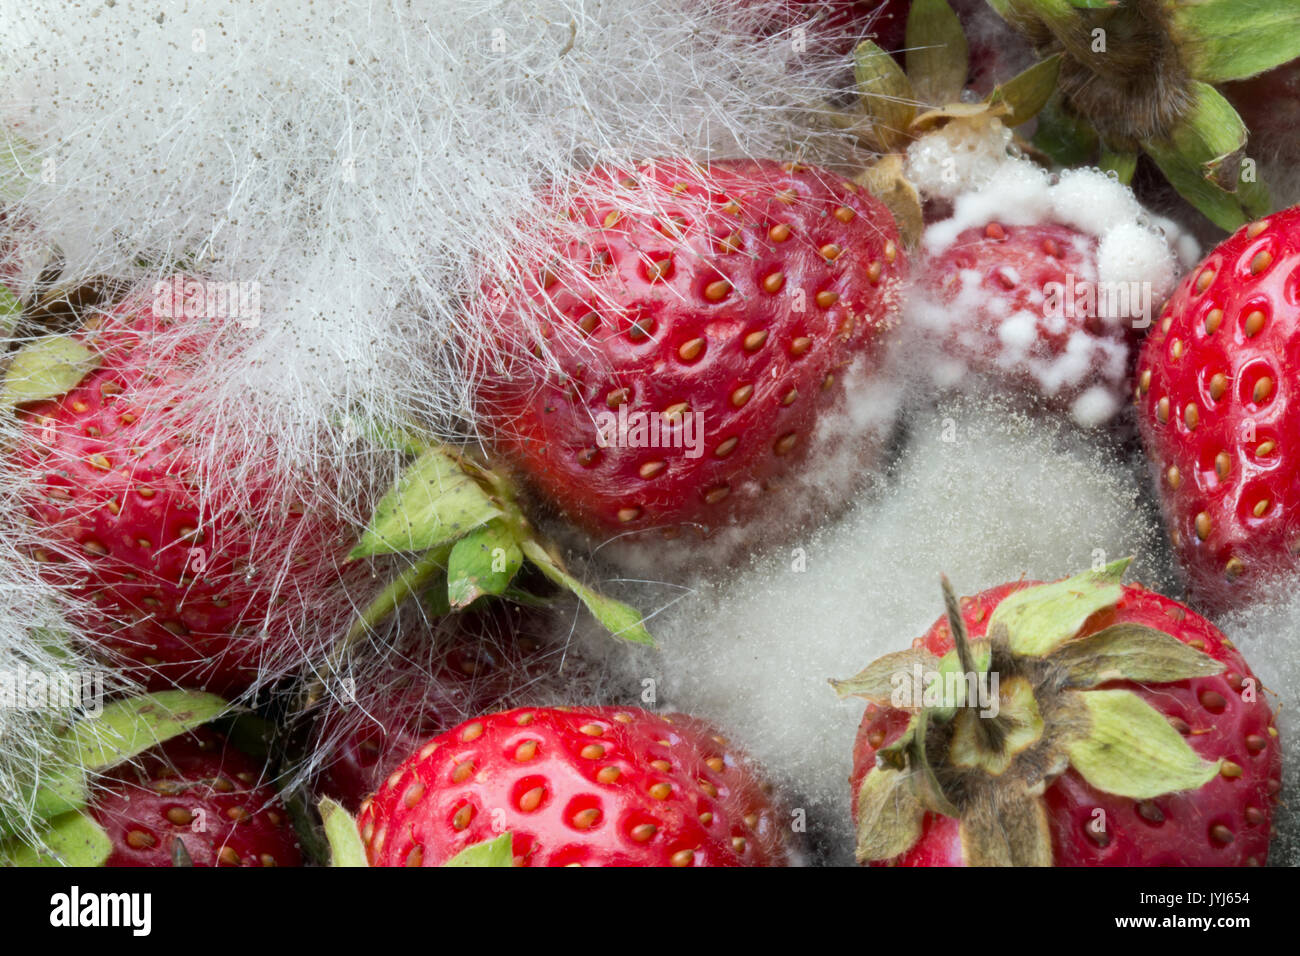 Rotting strawberries with fungus growing Stock Photo